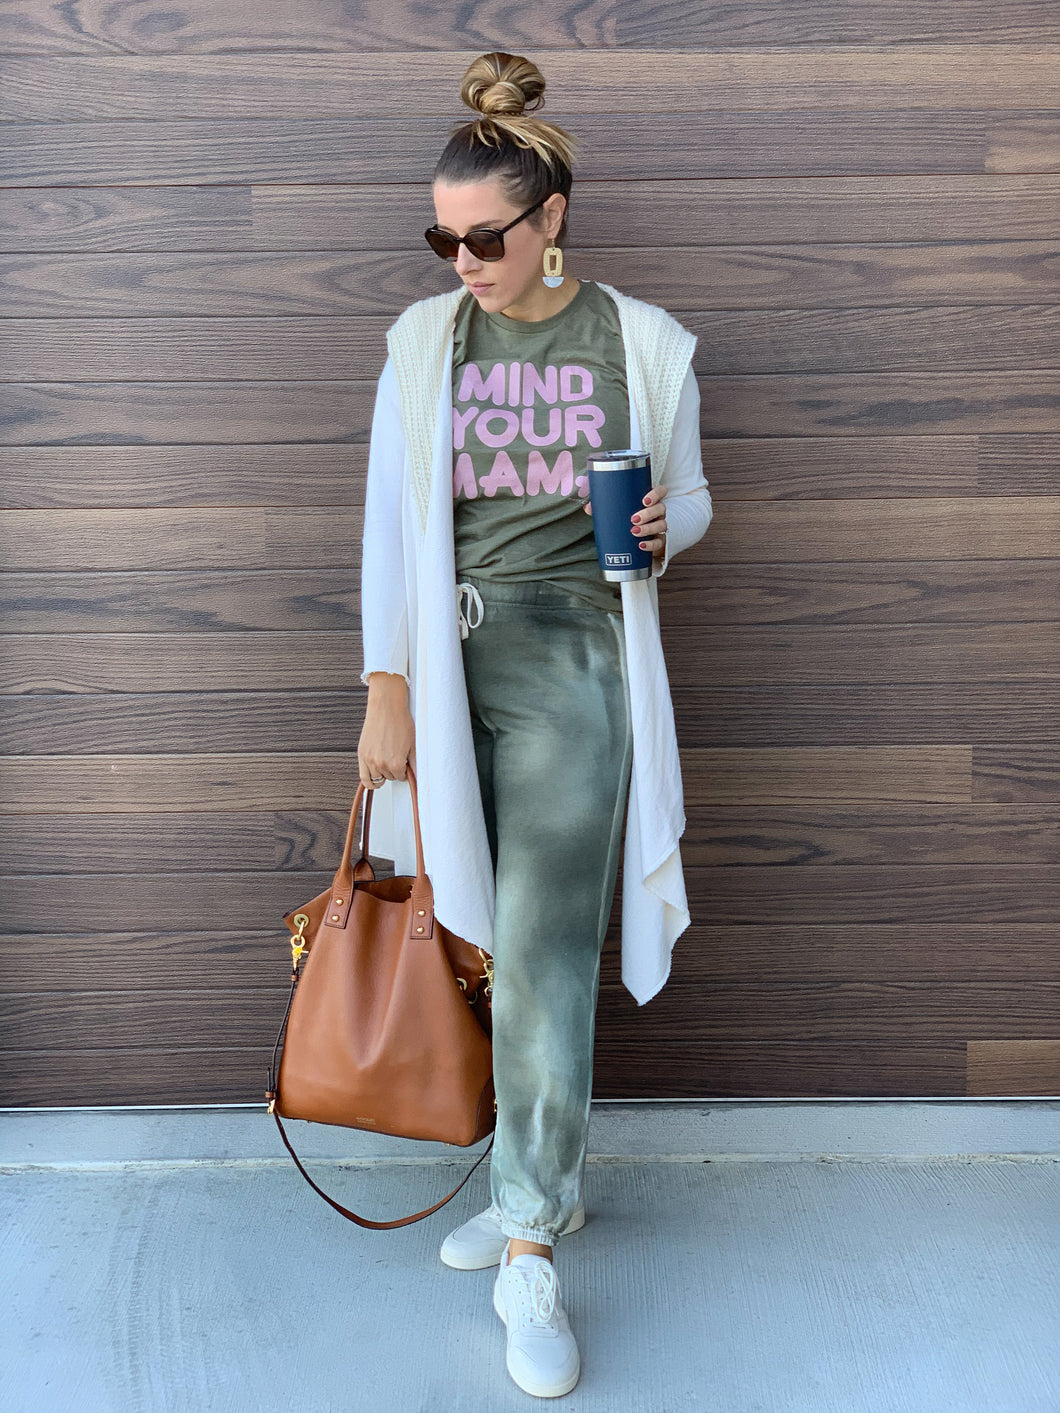 Mind Your Mama Metallic Rose Gold on OLIVE Green Tee